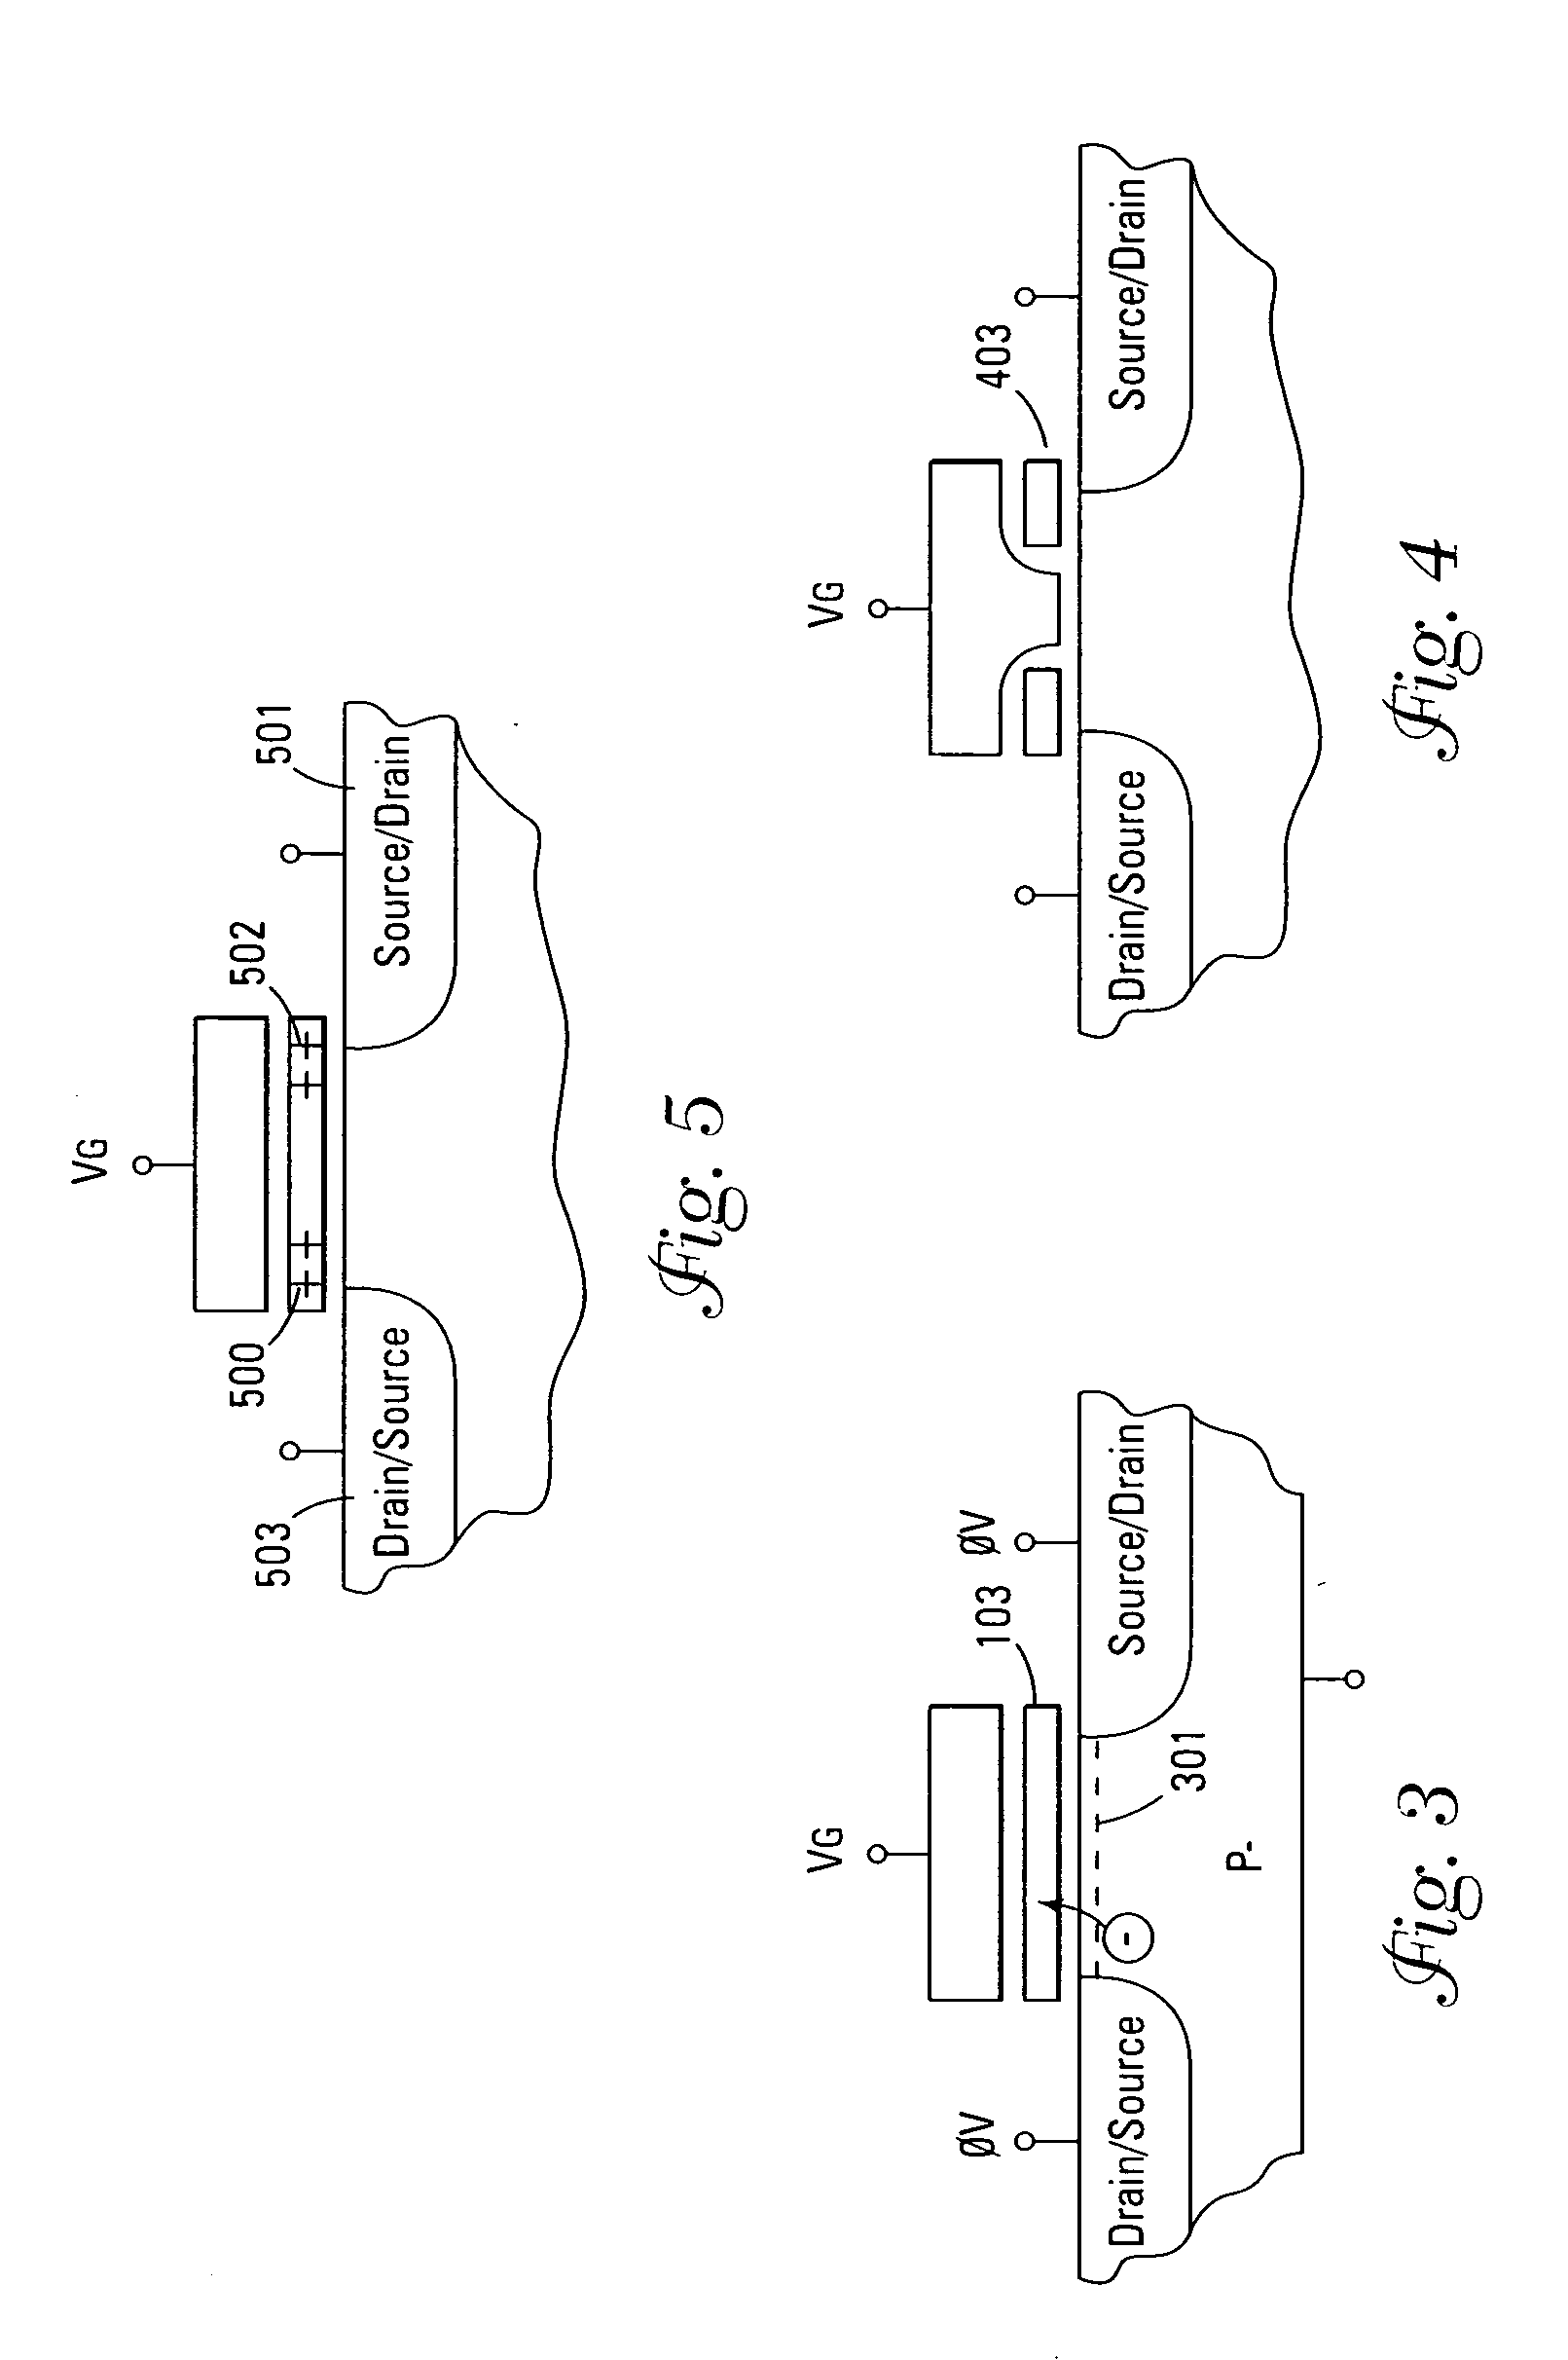 Multi-state memory cell with asymmetric charge trapping